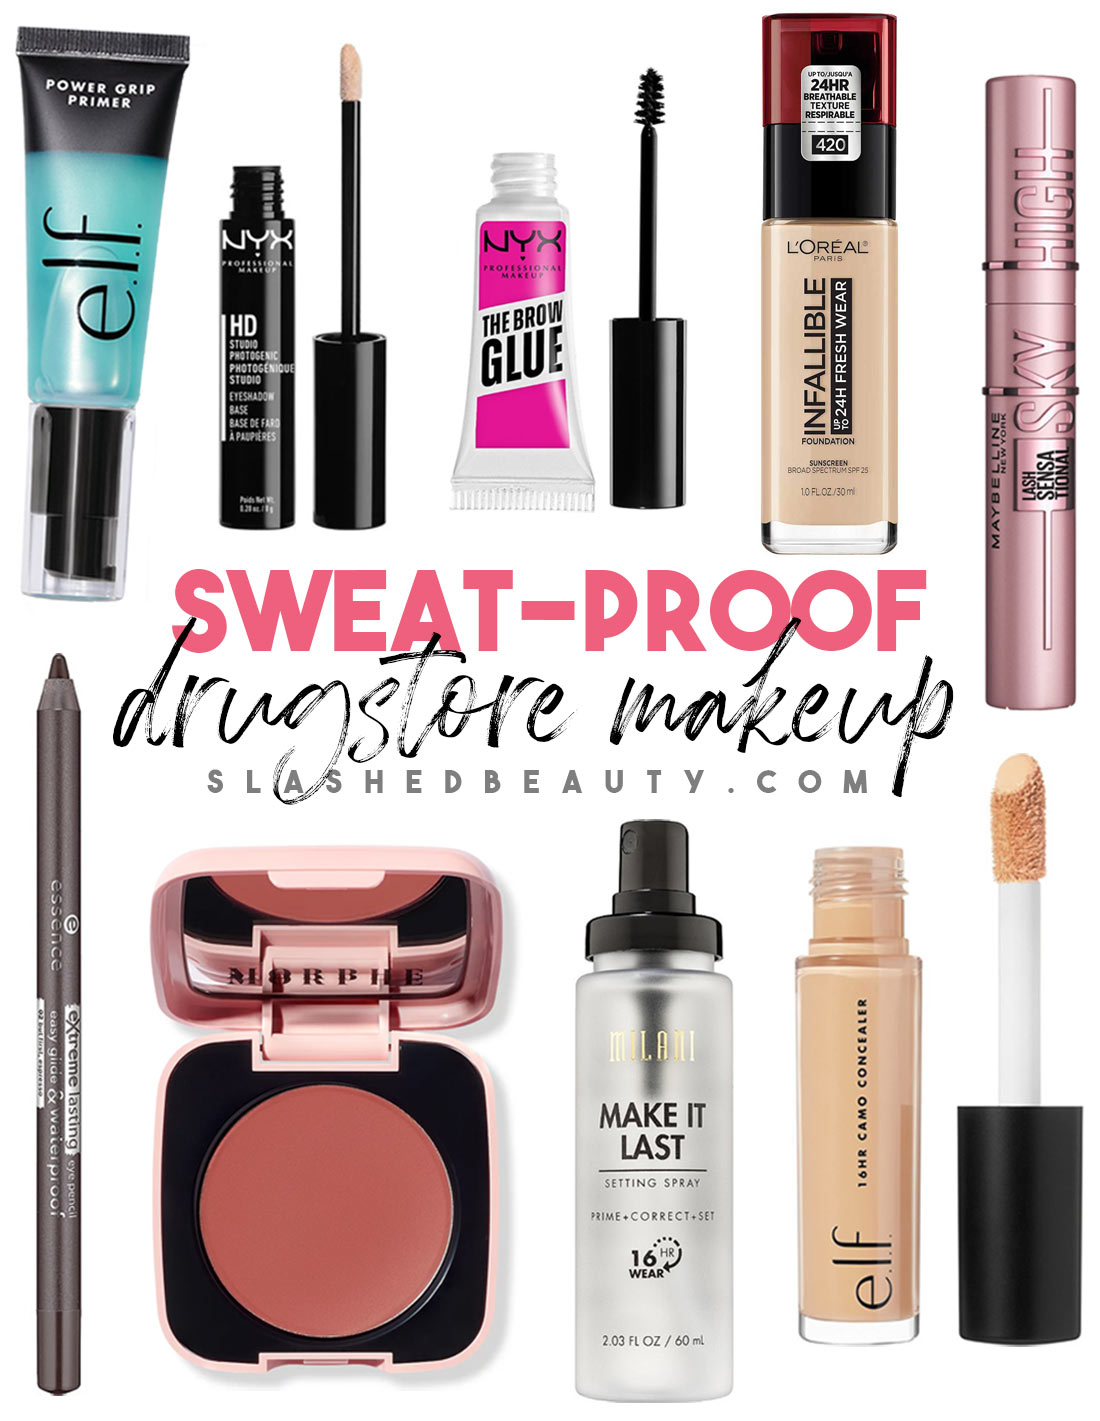 Collage of drugstore makeup products with text: Sweat-Proof Drugstore Makeup | Sweat Proof Drugstore Makeup that Even Humidity Won't Ruin | Slashed Beauty